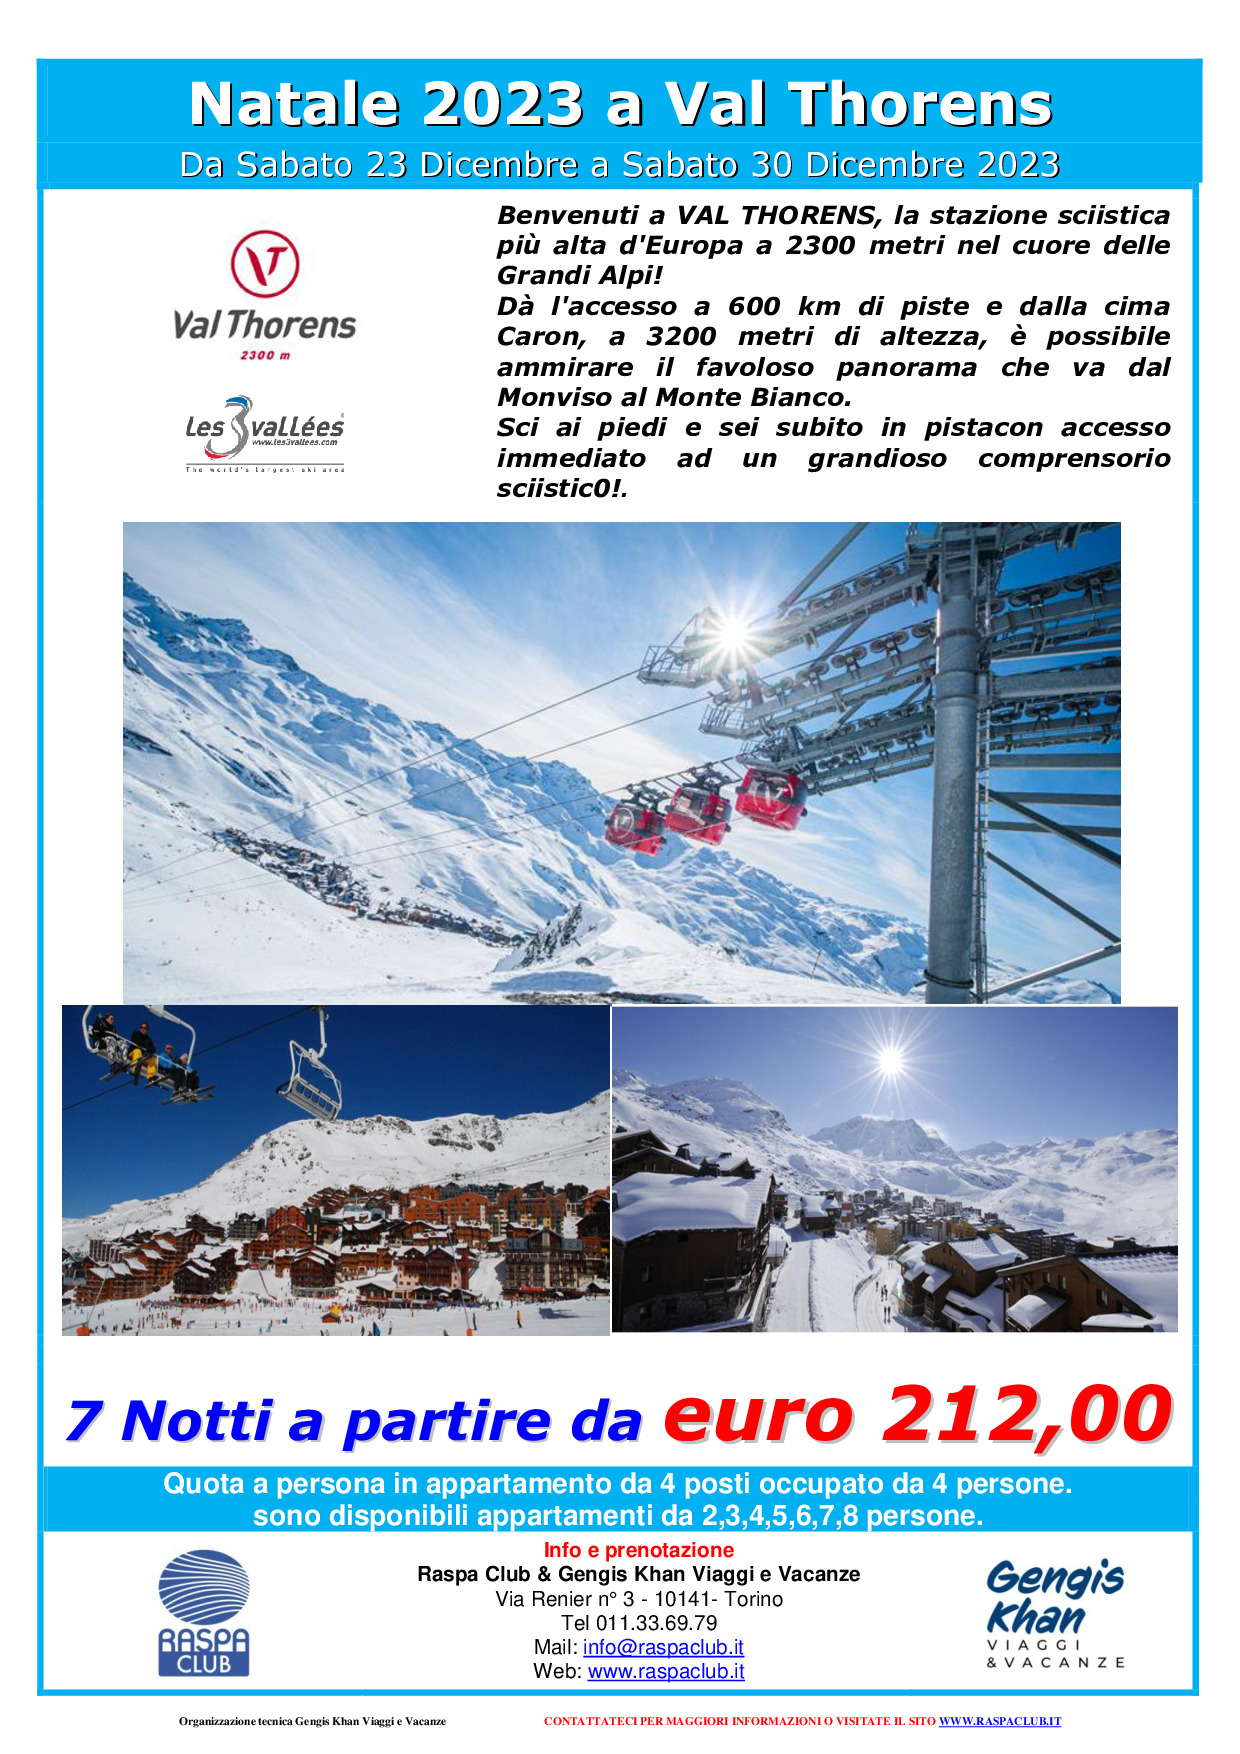 Natale a Val Thorens